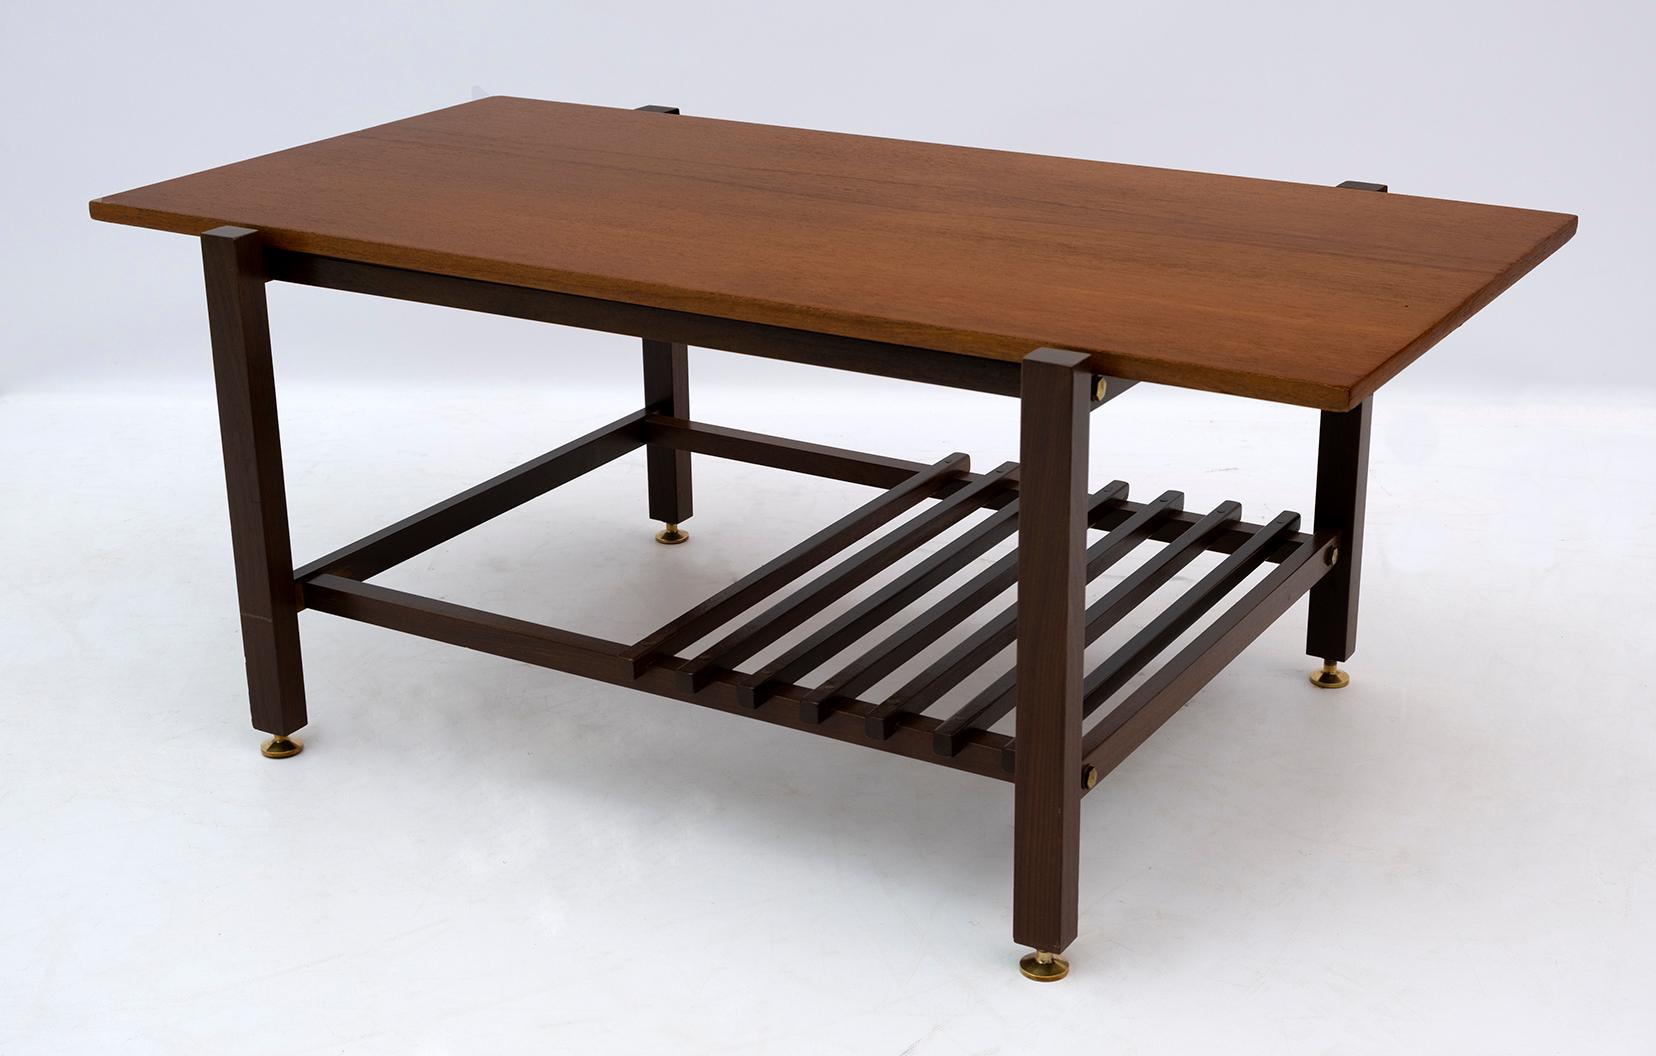 This coffee table was designed by Ico Parisi and produced in the 1950s, the table has been restored and polished with shellac, the feet are in brass.